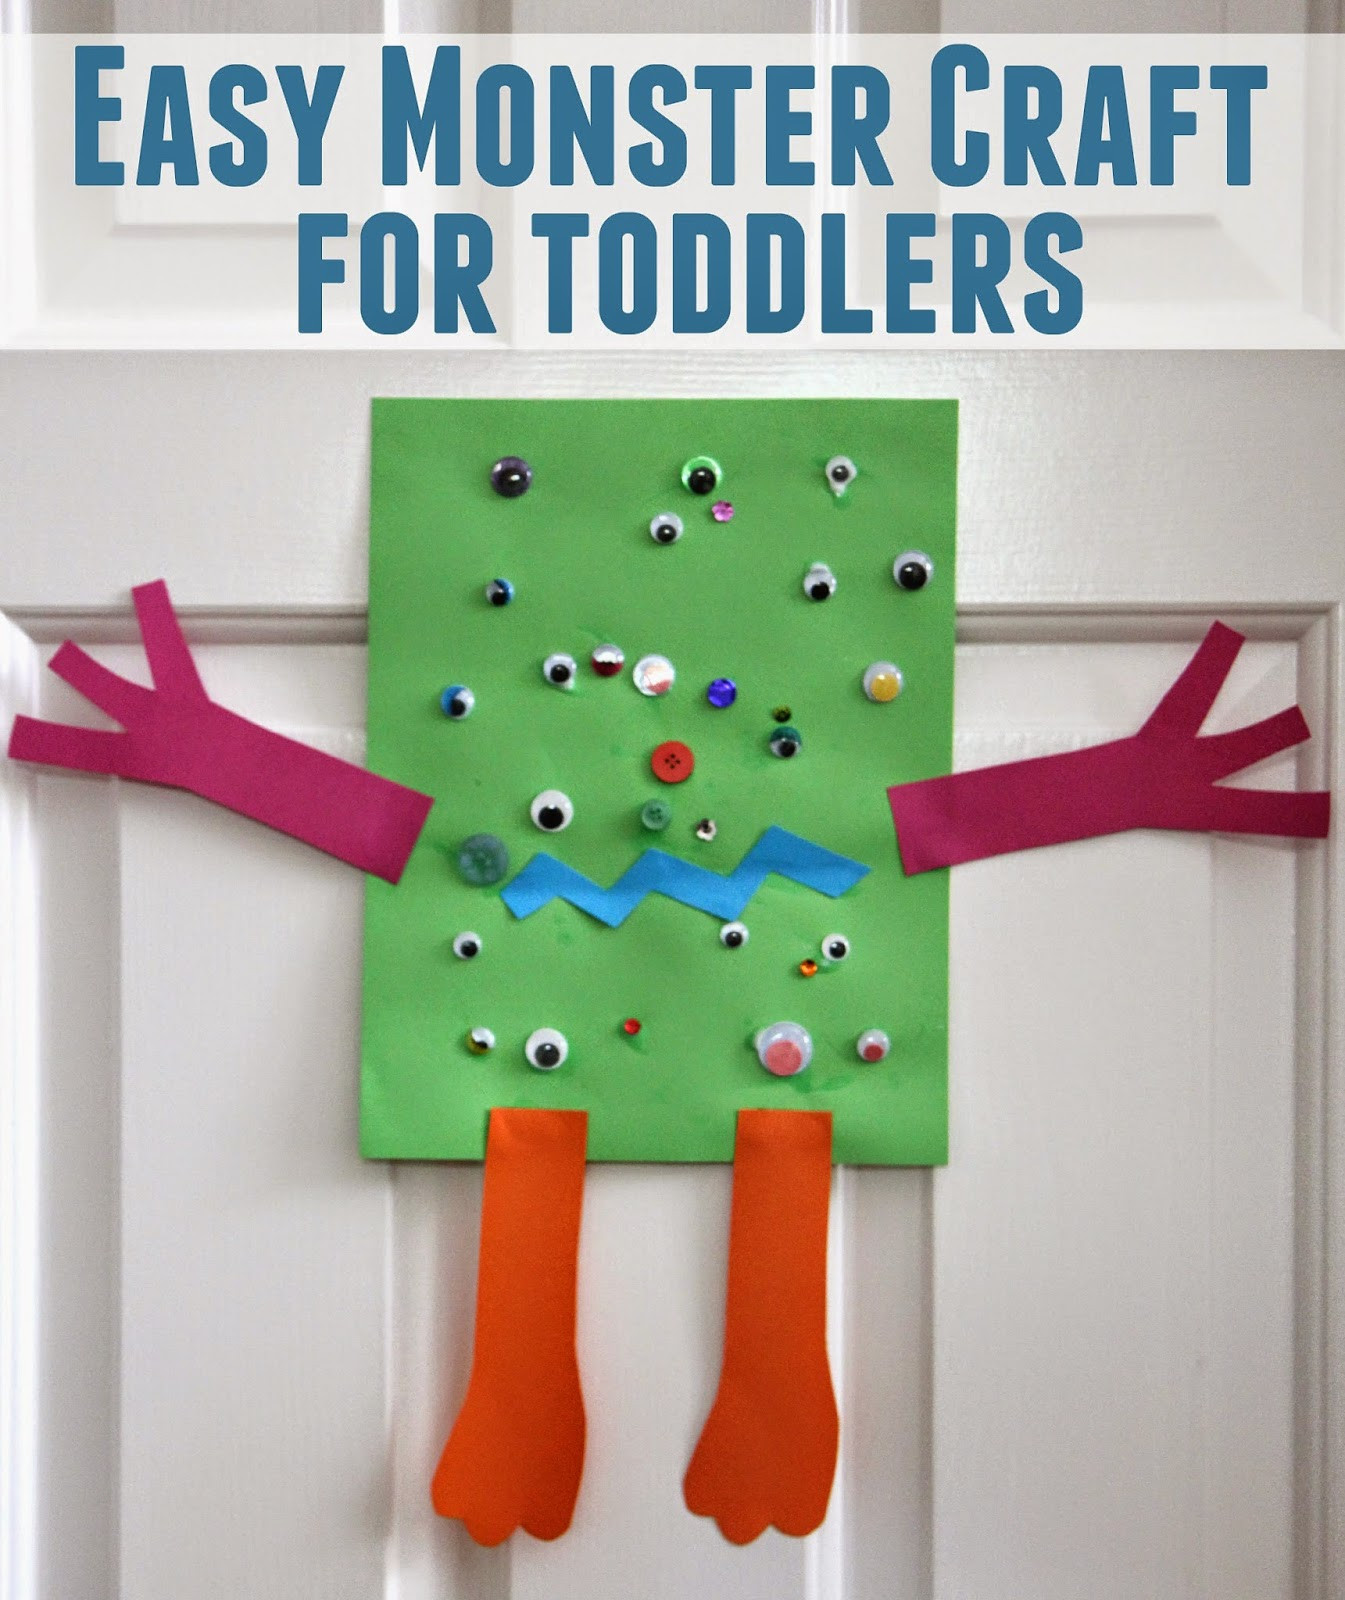 Easy Preschool Craft Ideas
 Toddler Approved Easy Monster Craft for Toddlers